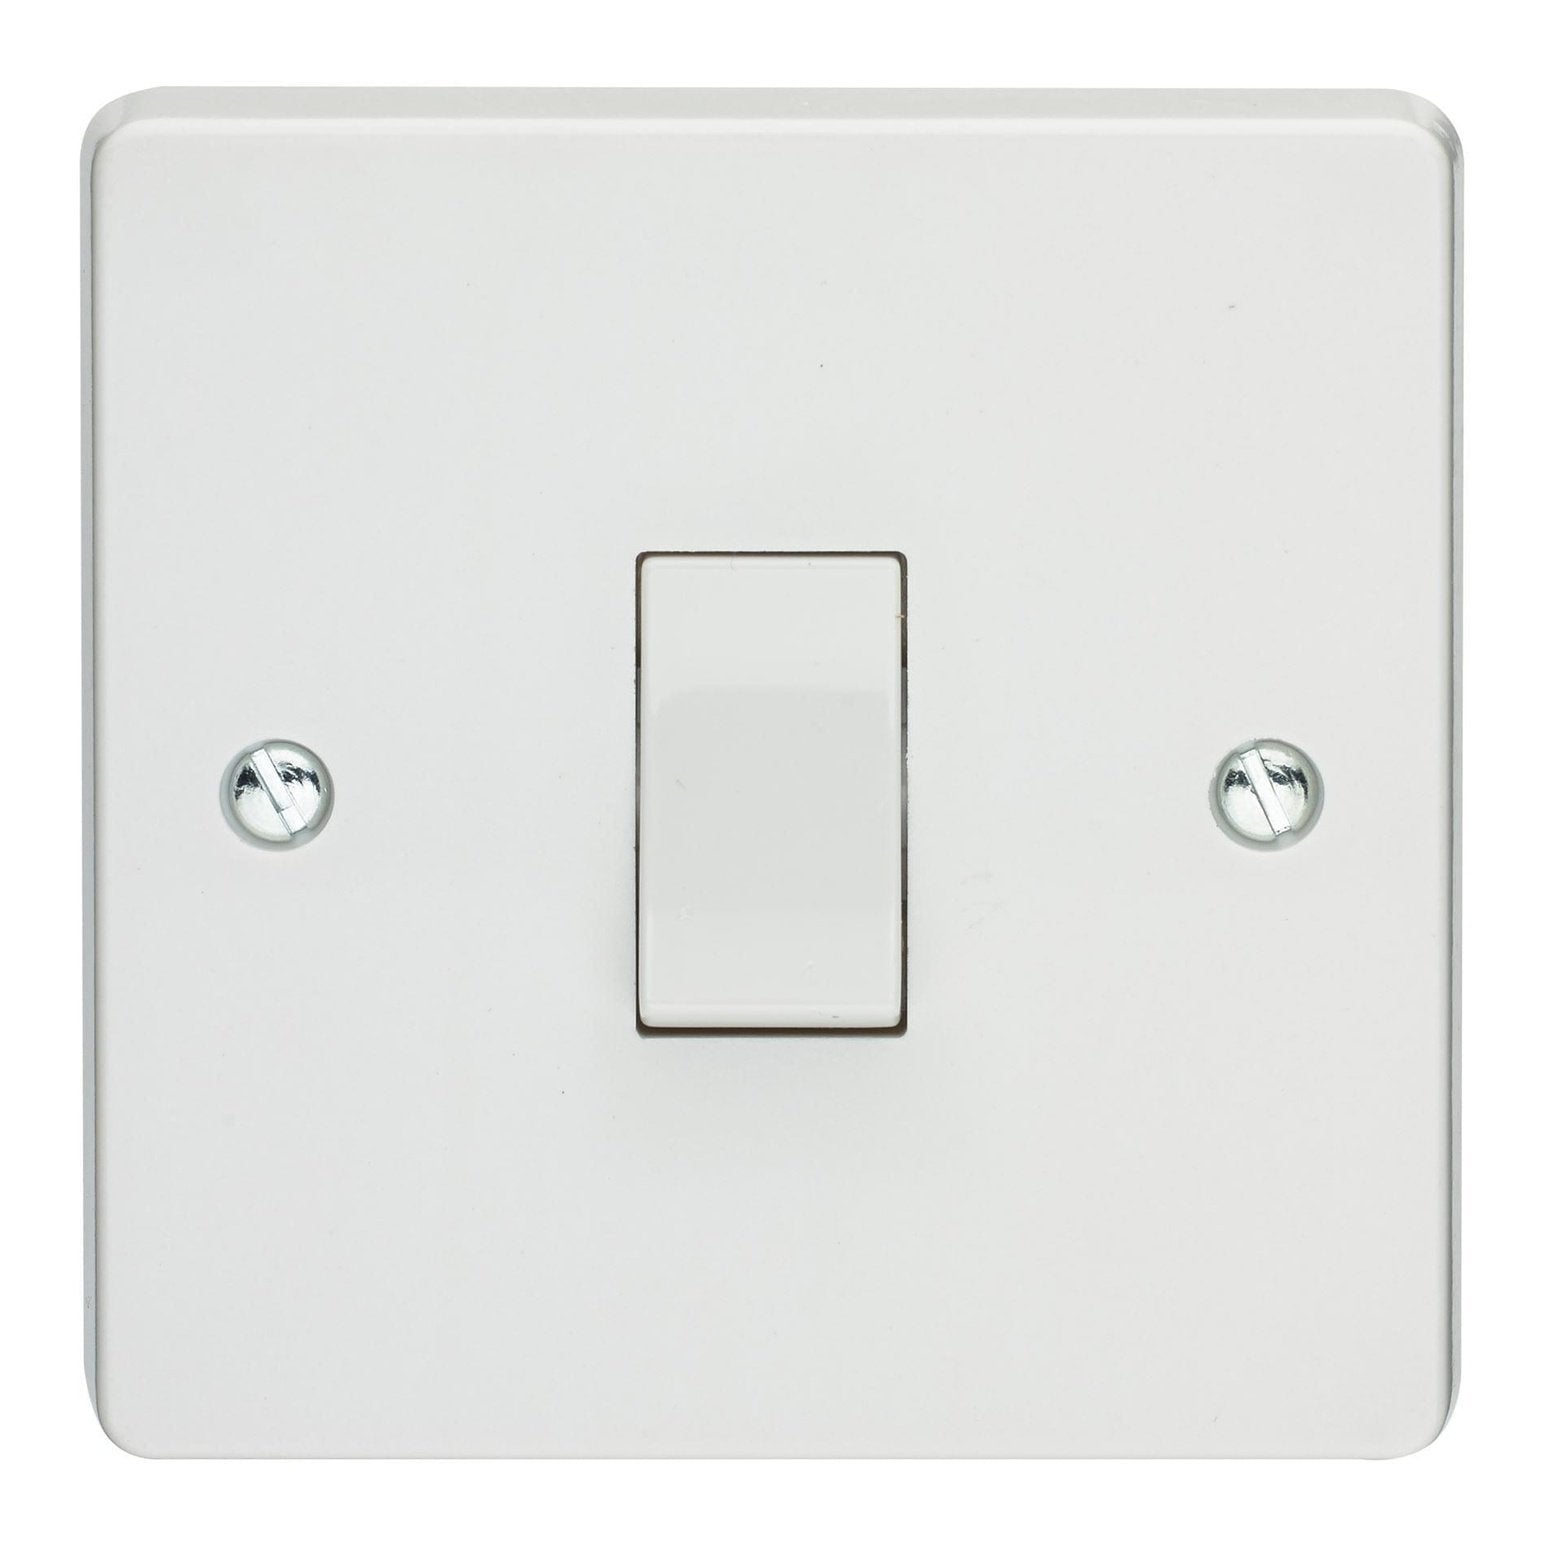 Crabtree 15A 1 Gang Single Switched Socket White | Supply Master | Accra, Ghana Switches & Sockets Buy Tools hardware Building materials